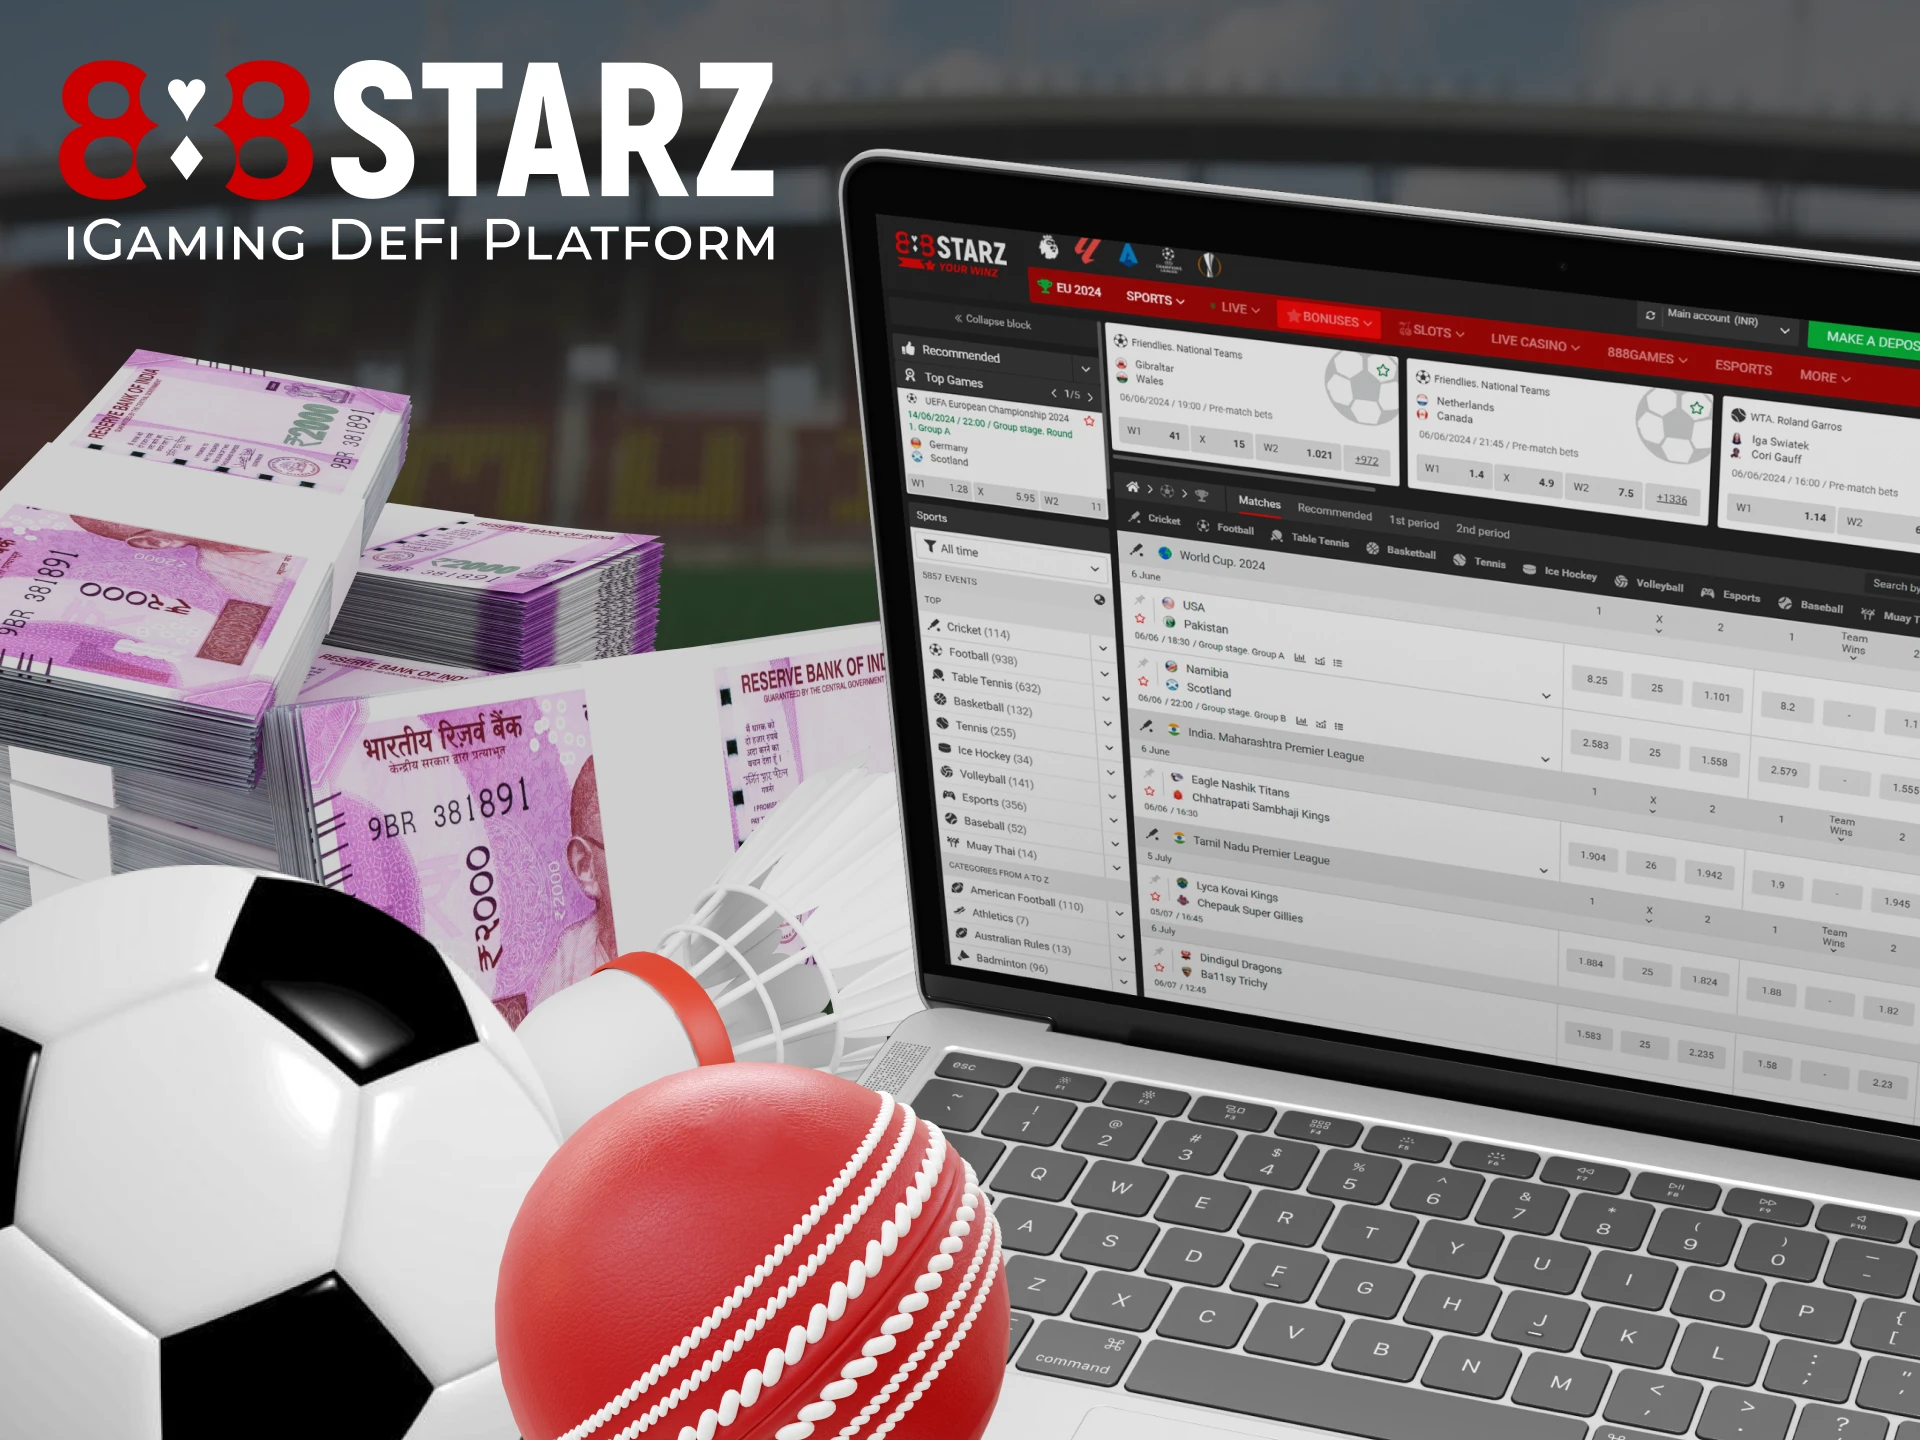 After registering with 888Starz, go to the sports section and try placing a bet.